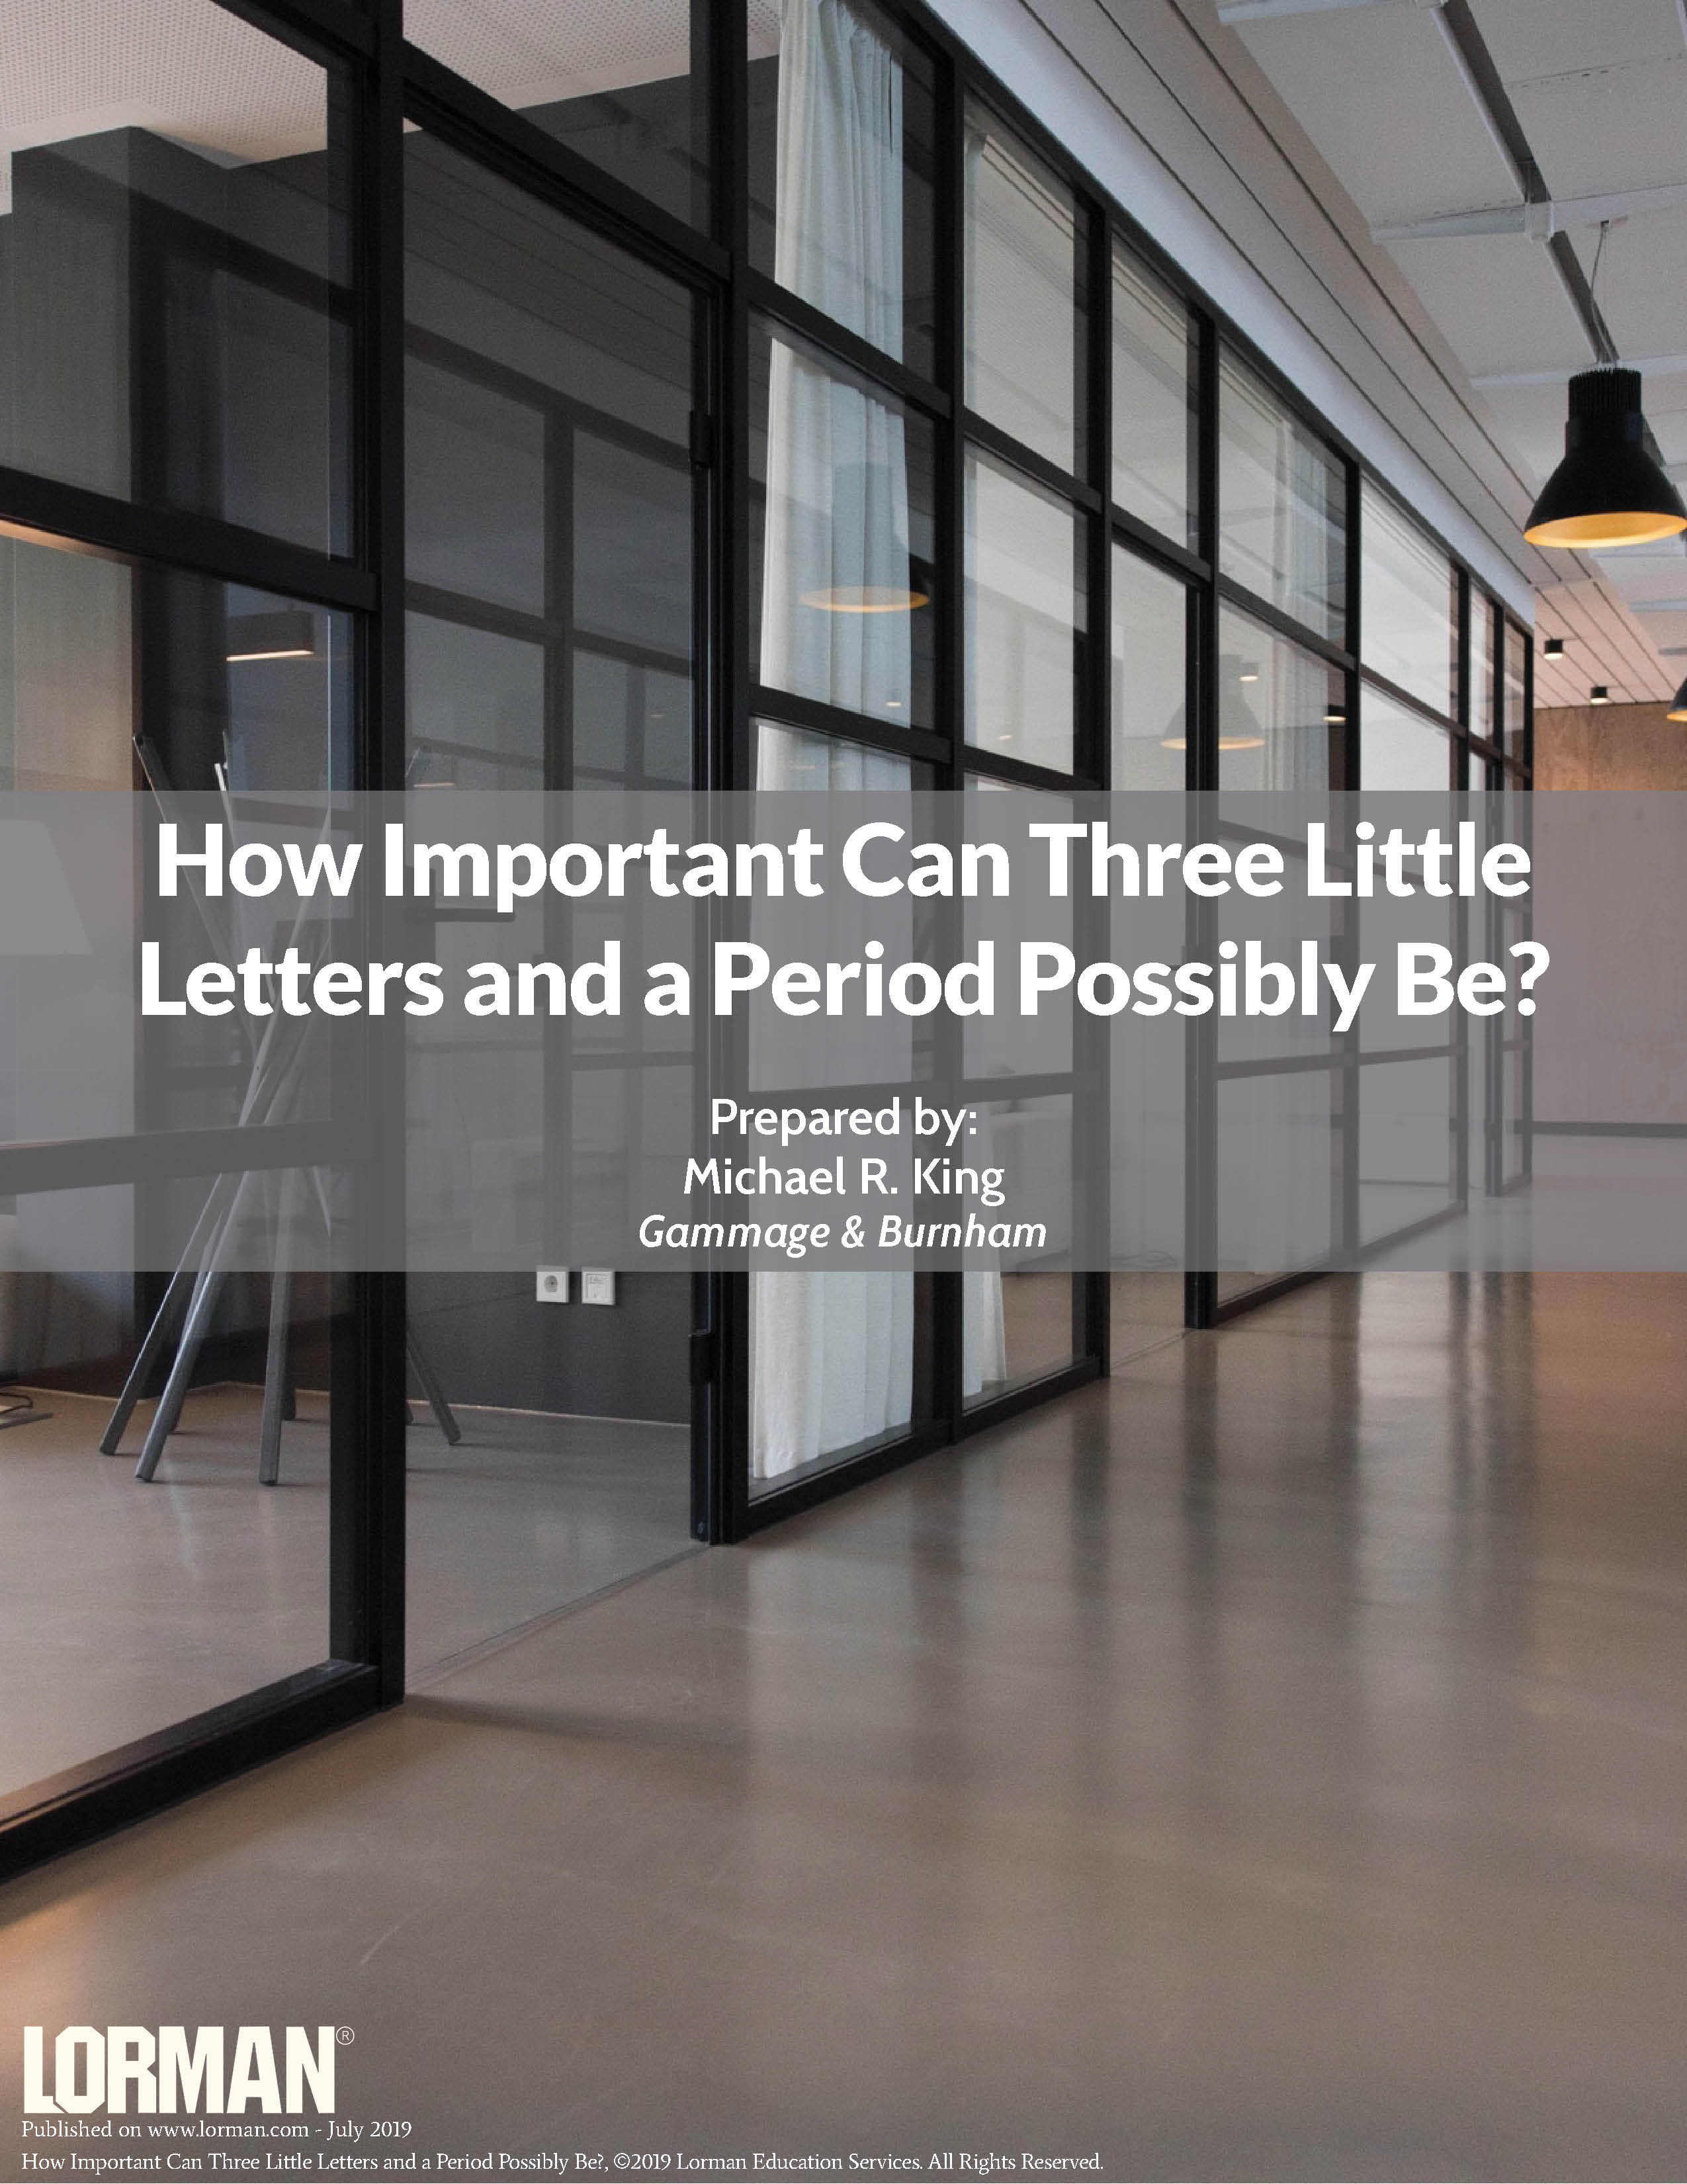 How Important Can Three Little Letters and a Period Possibly Be?